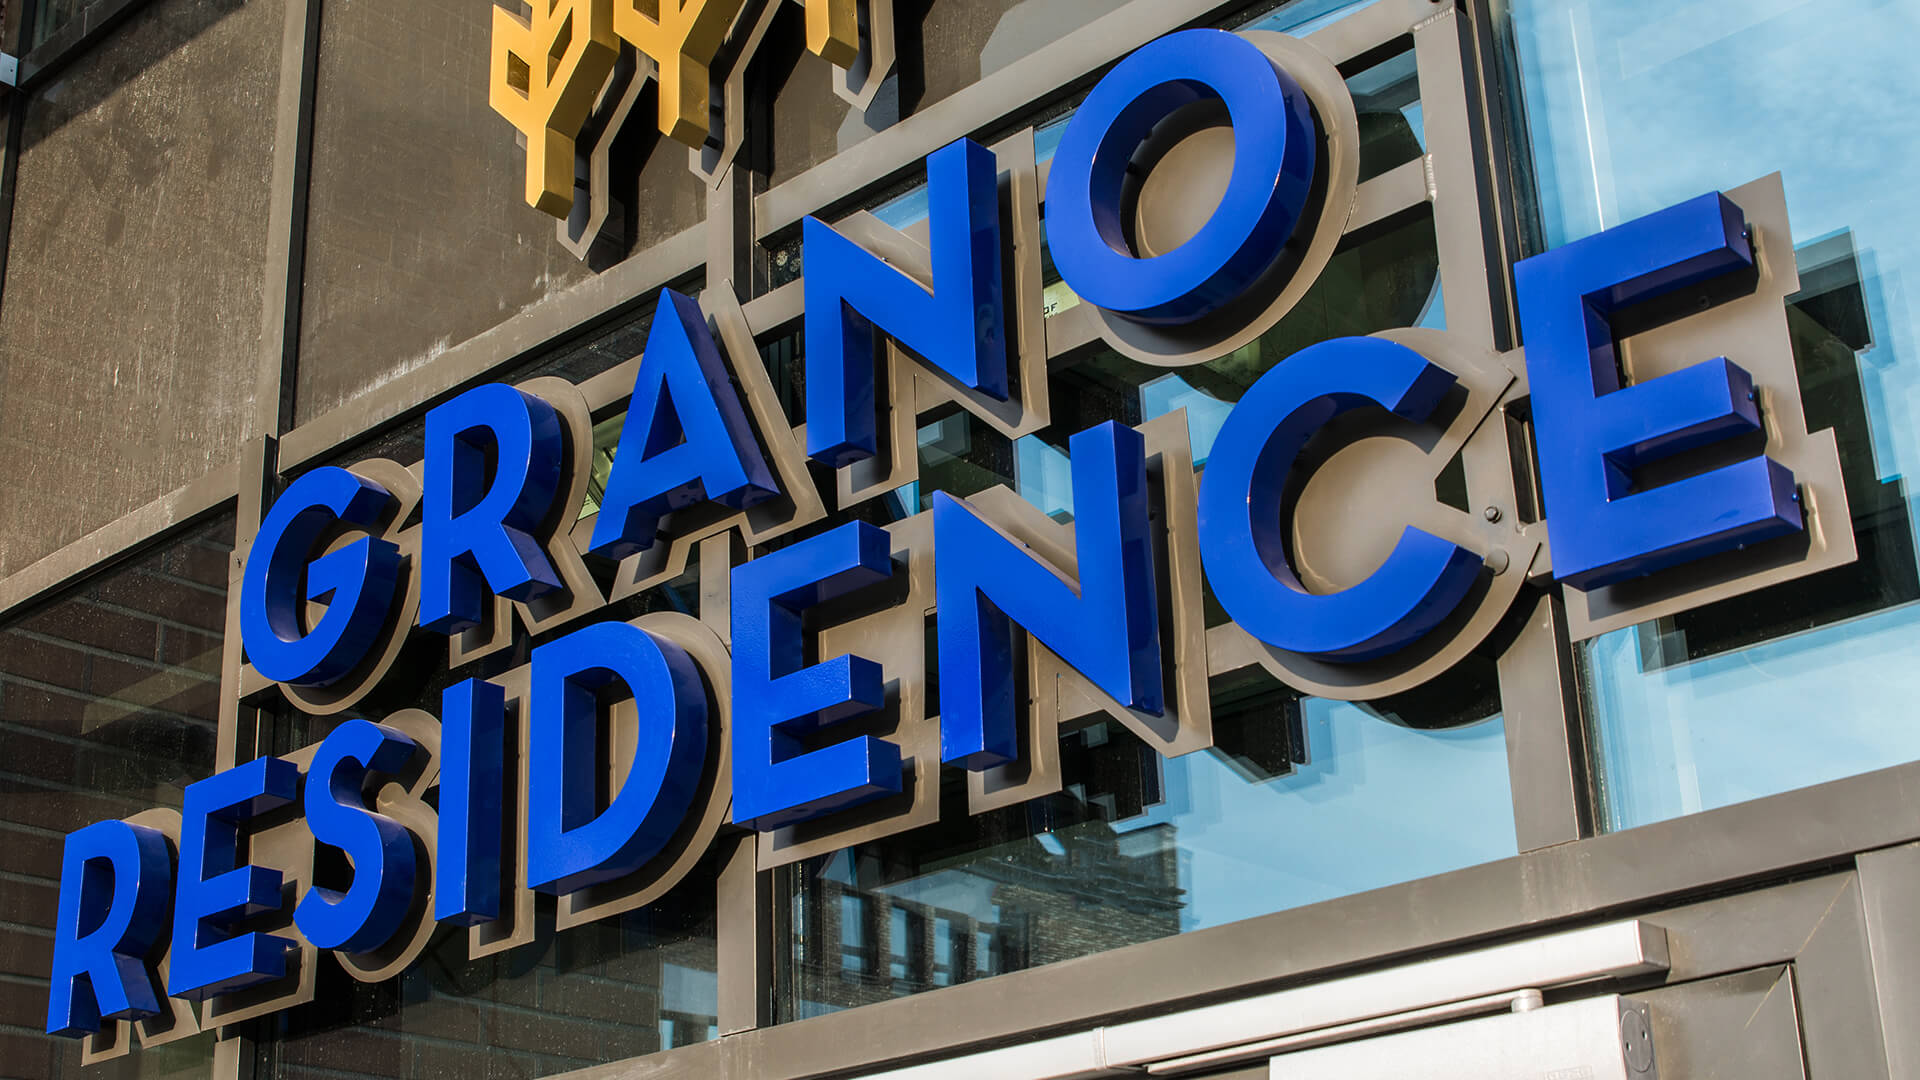 grano residence hotel apartments apartments - grano-residence-spatial lettering-backlit-blue lettering-above-the-hotel-entry lettering-mounted-on-a-frame lettering-on-a-frame lettering-within-a-firm-logo-3d-gdansk